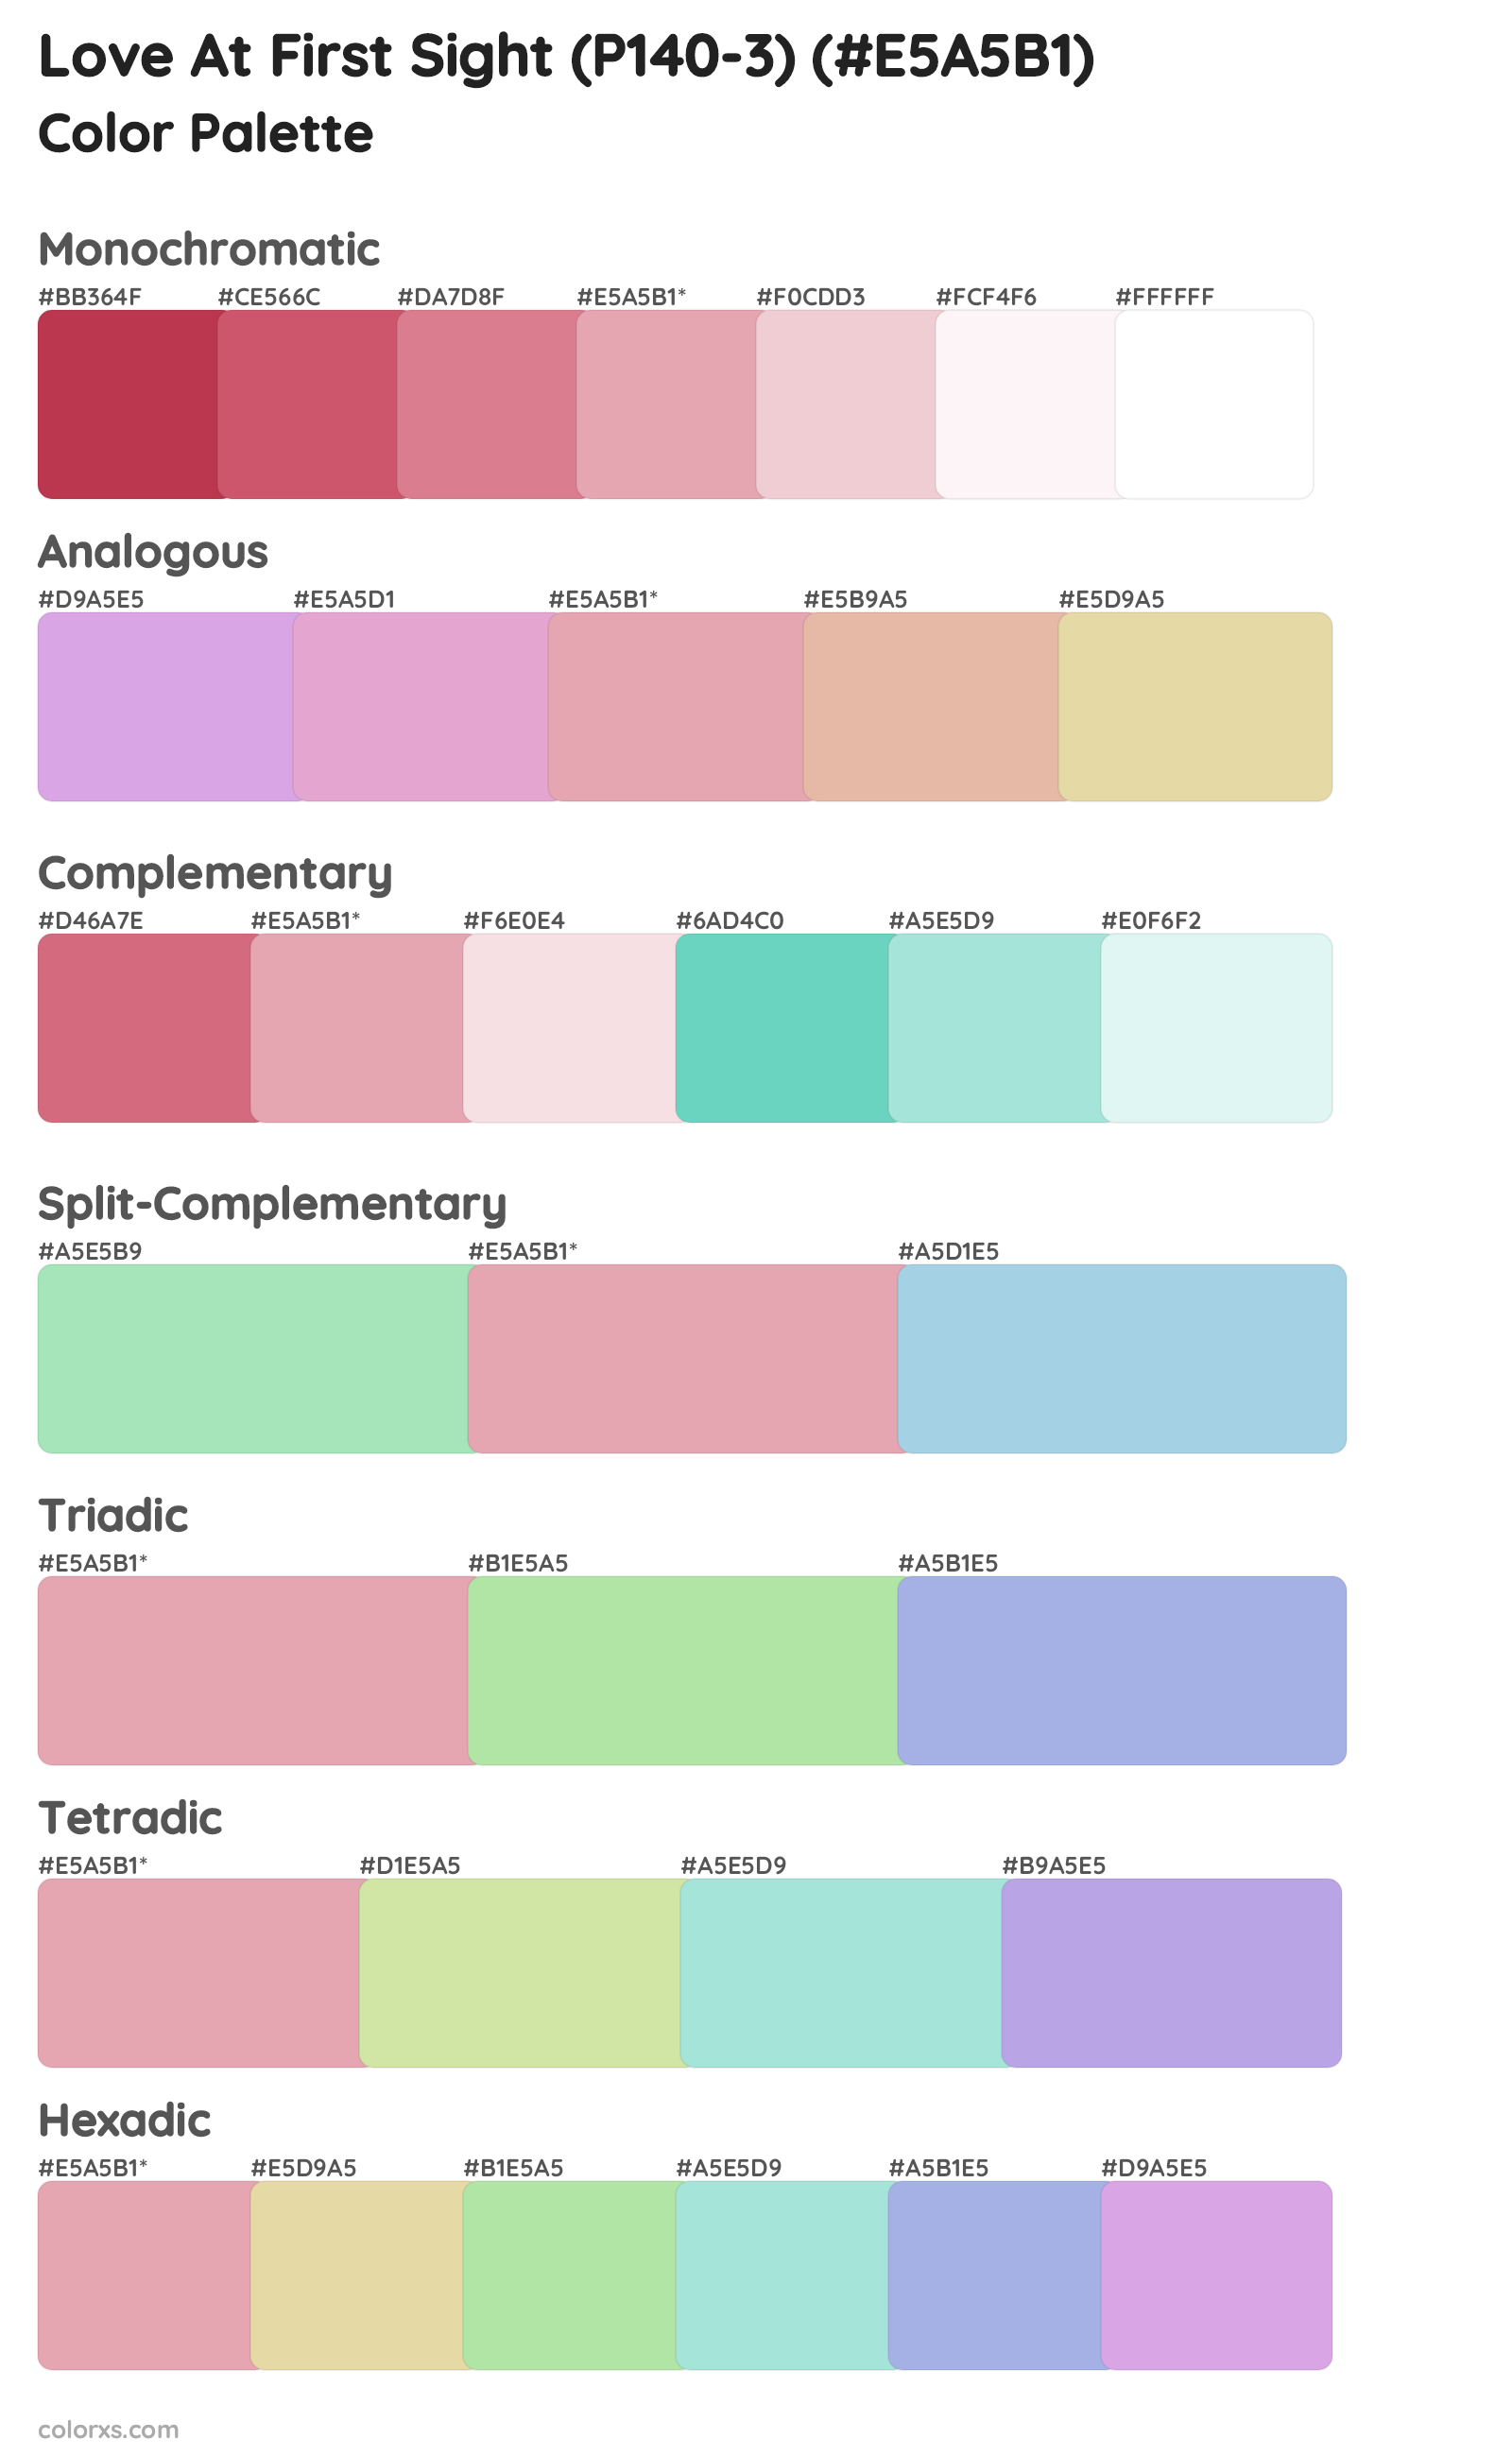 Love At First Sight (P140-3) Color Scheme Palettes